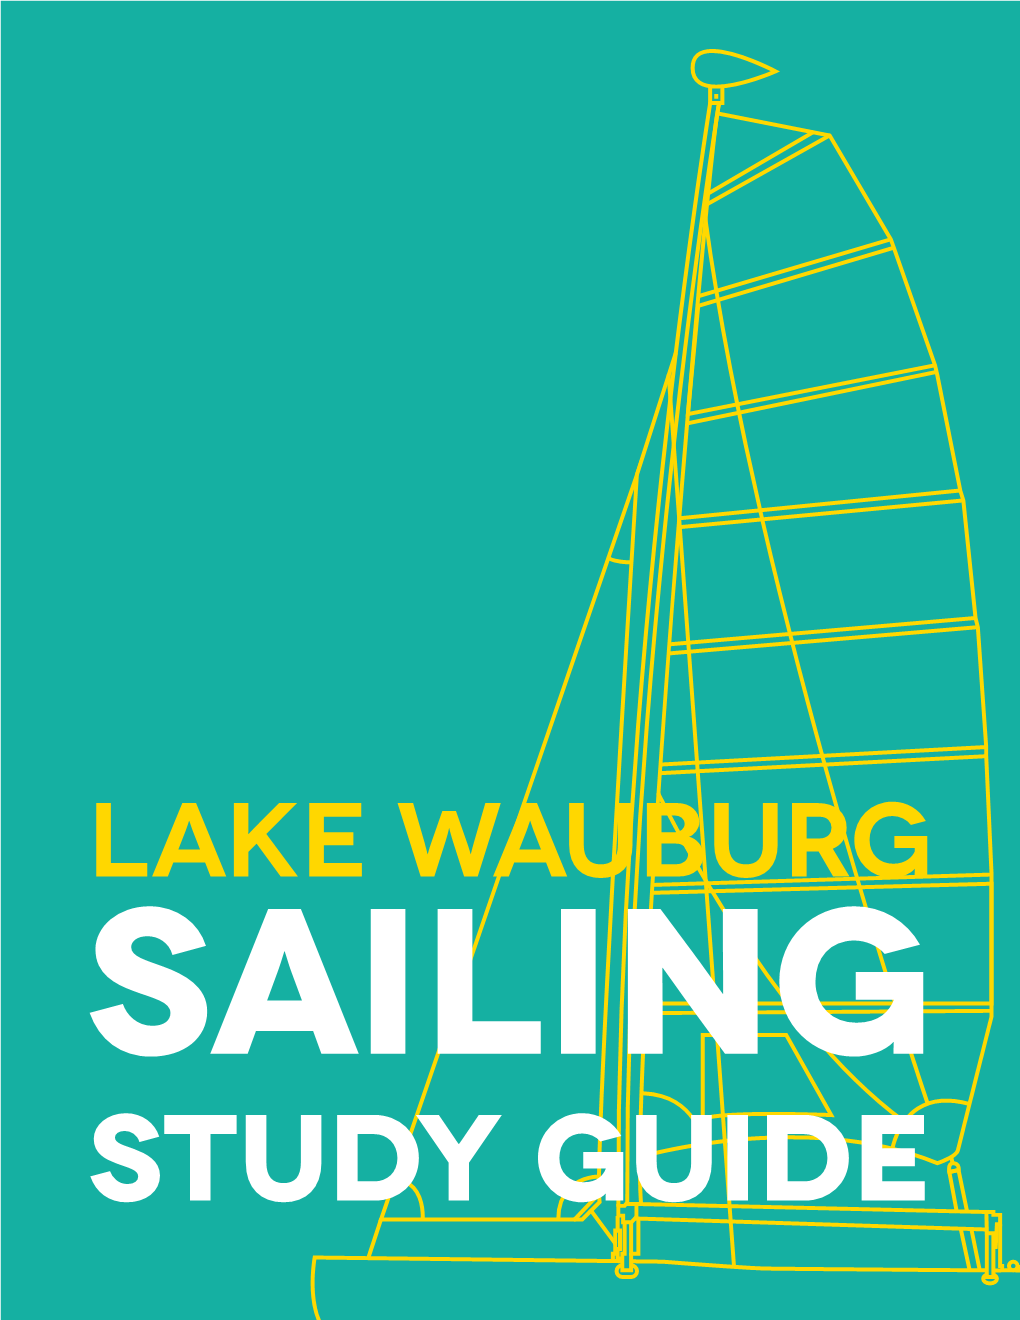 SAILING STUDY GUIDE Parts Terminology